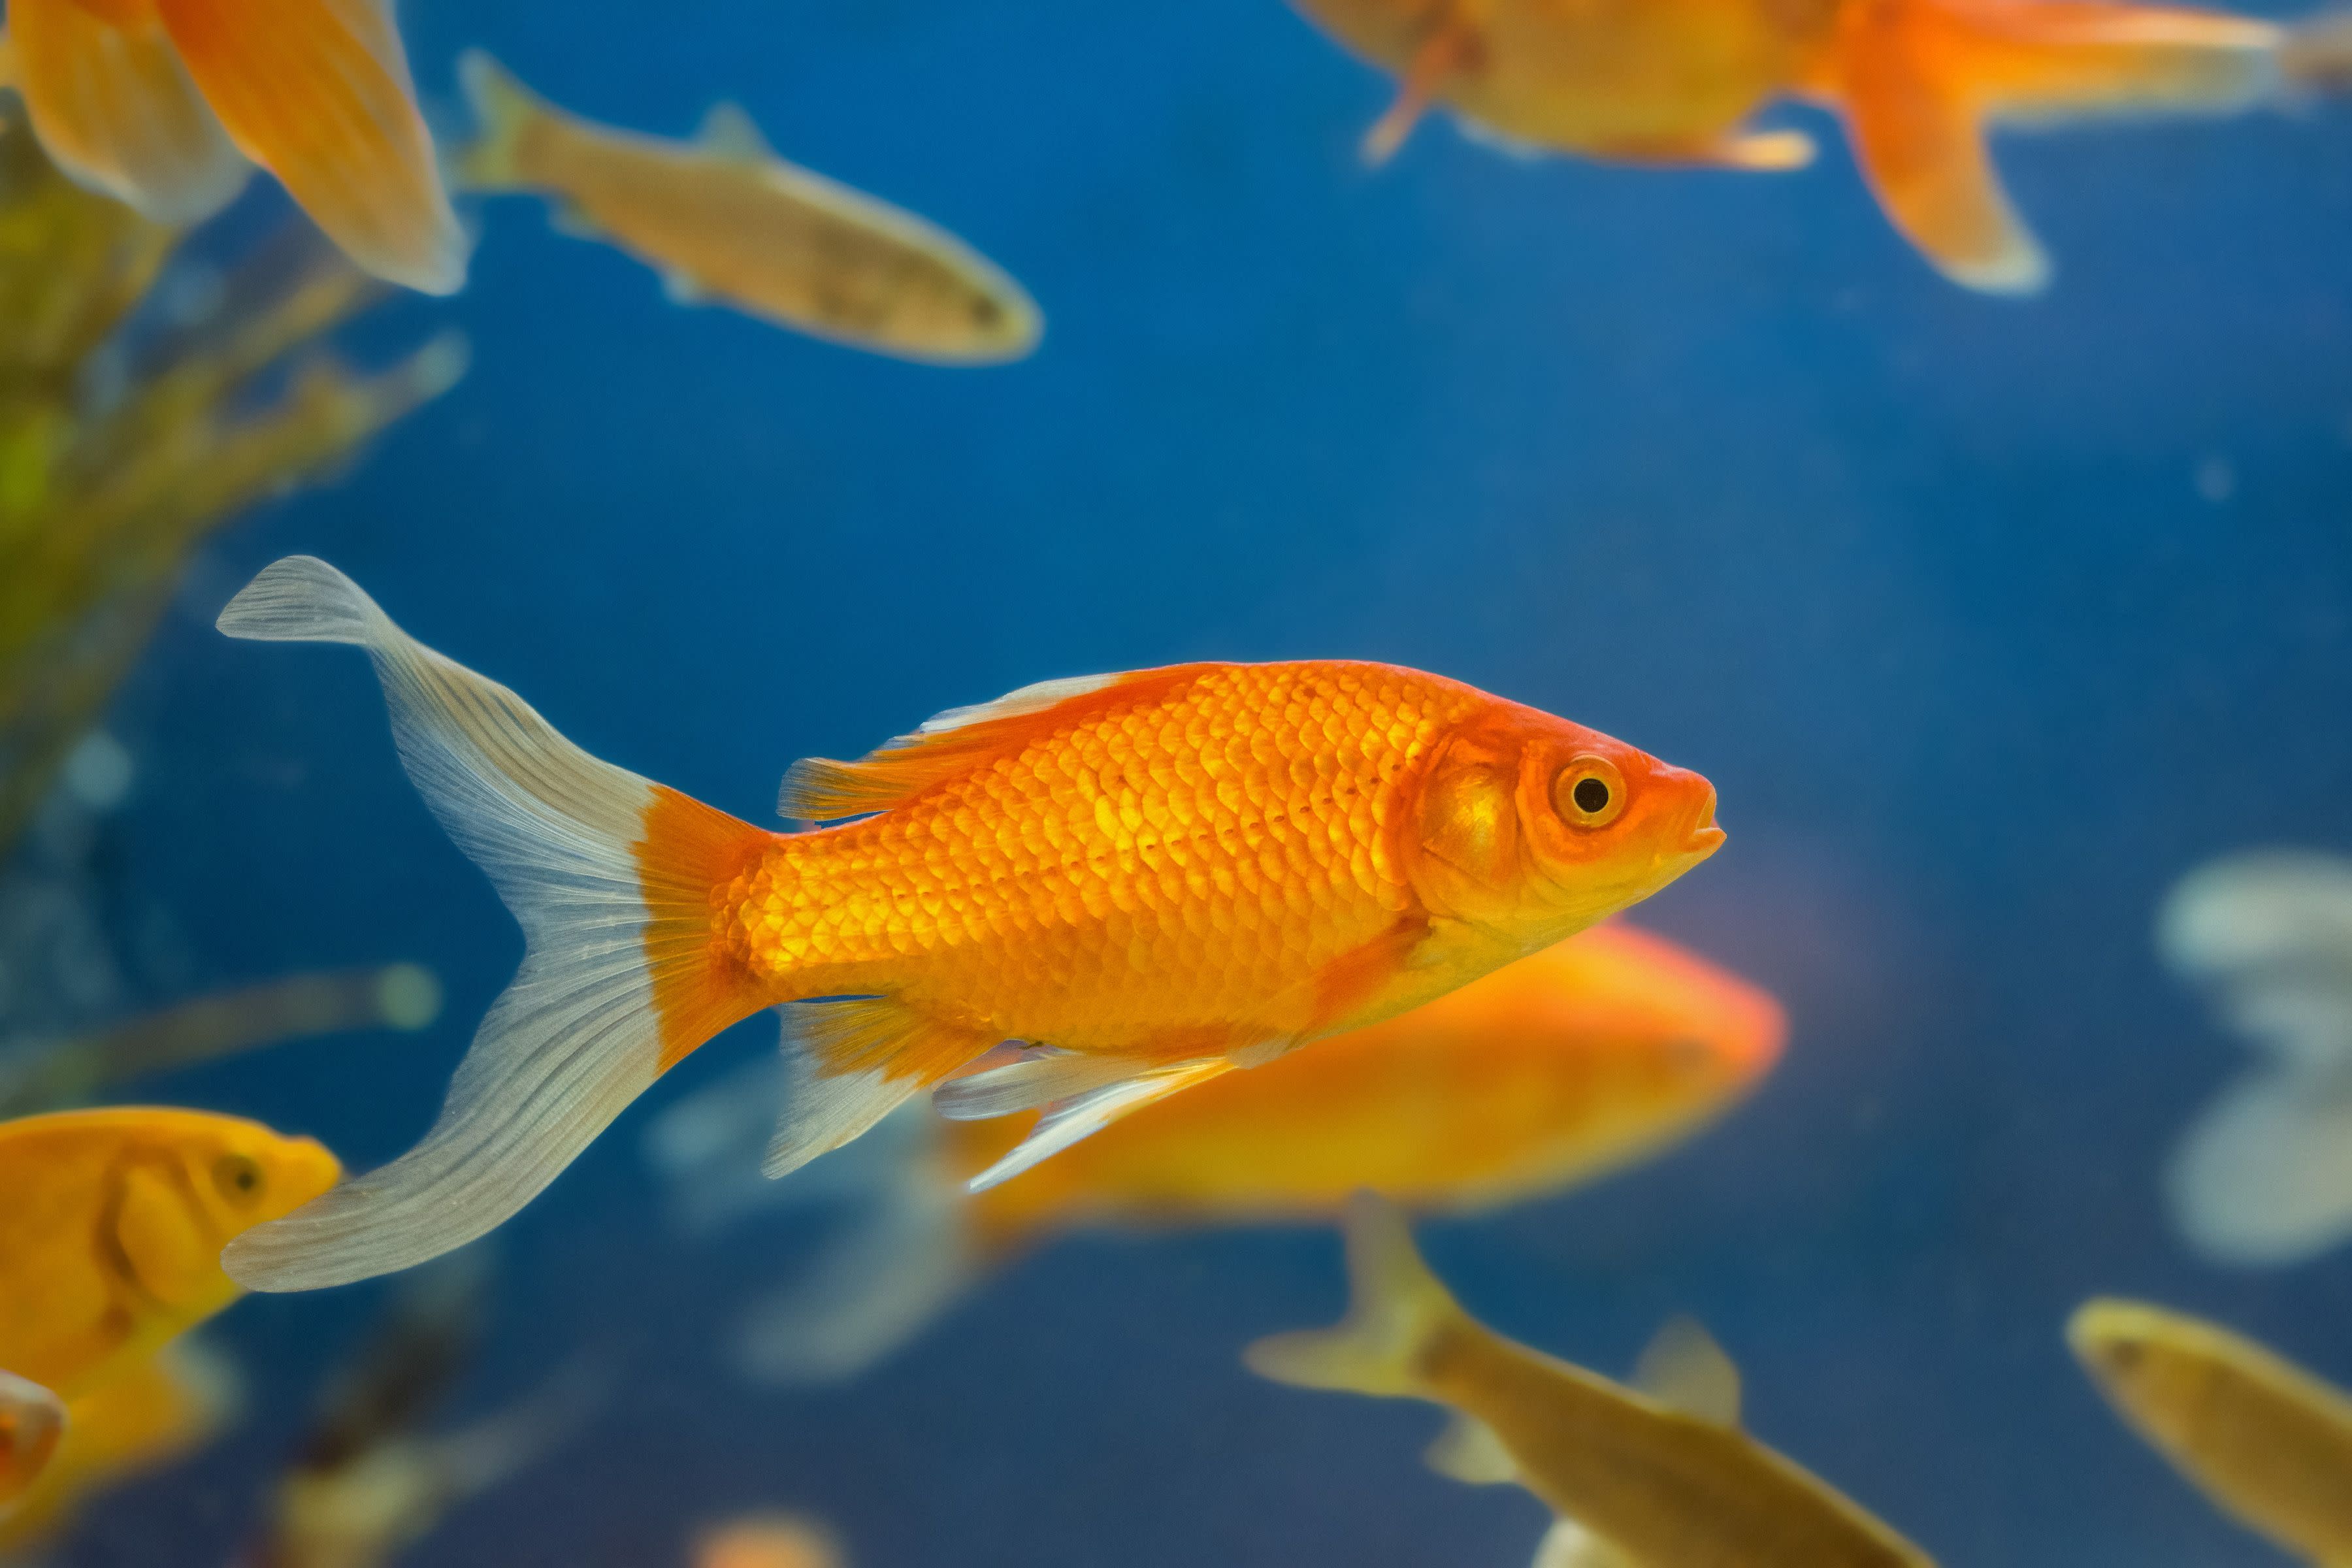 Fish or Fishes: Learn Which is the Correct Plural Form